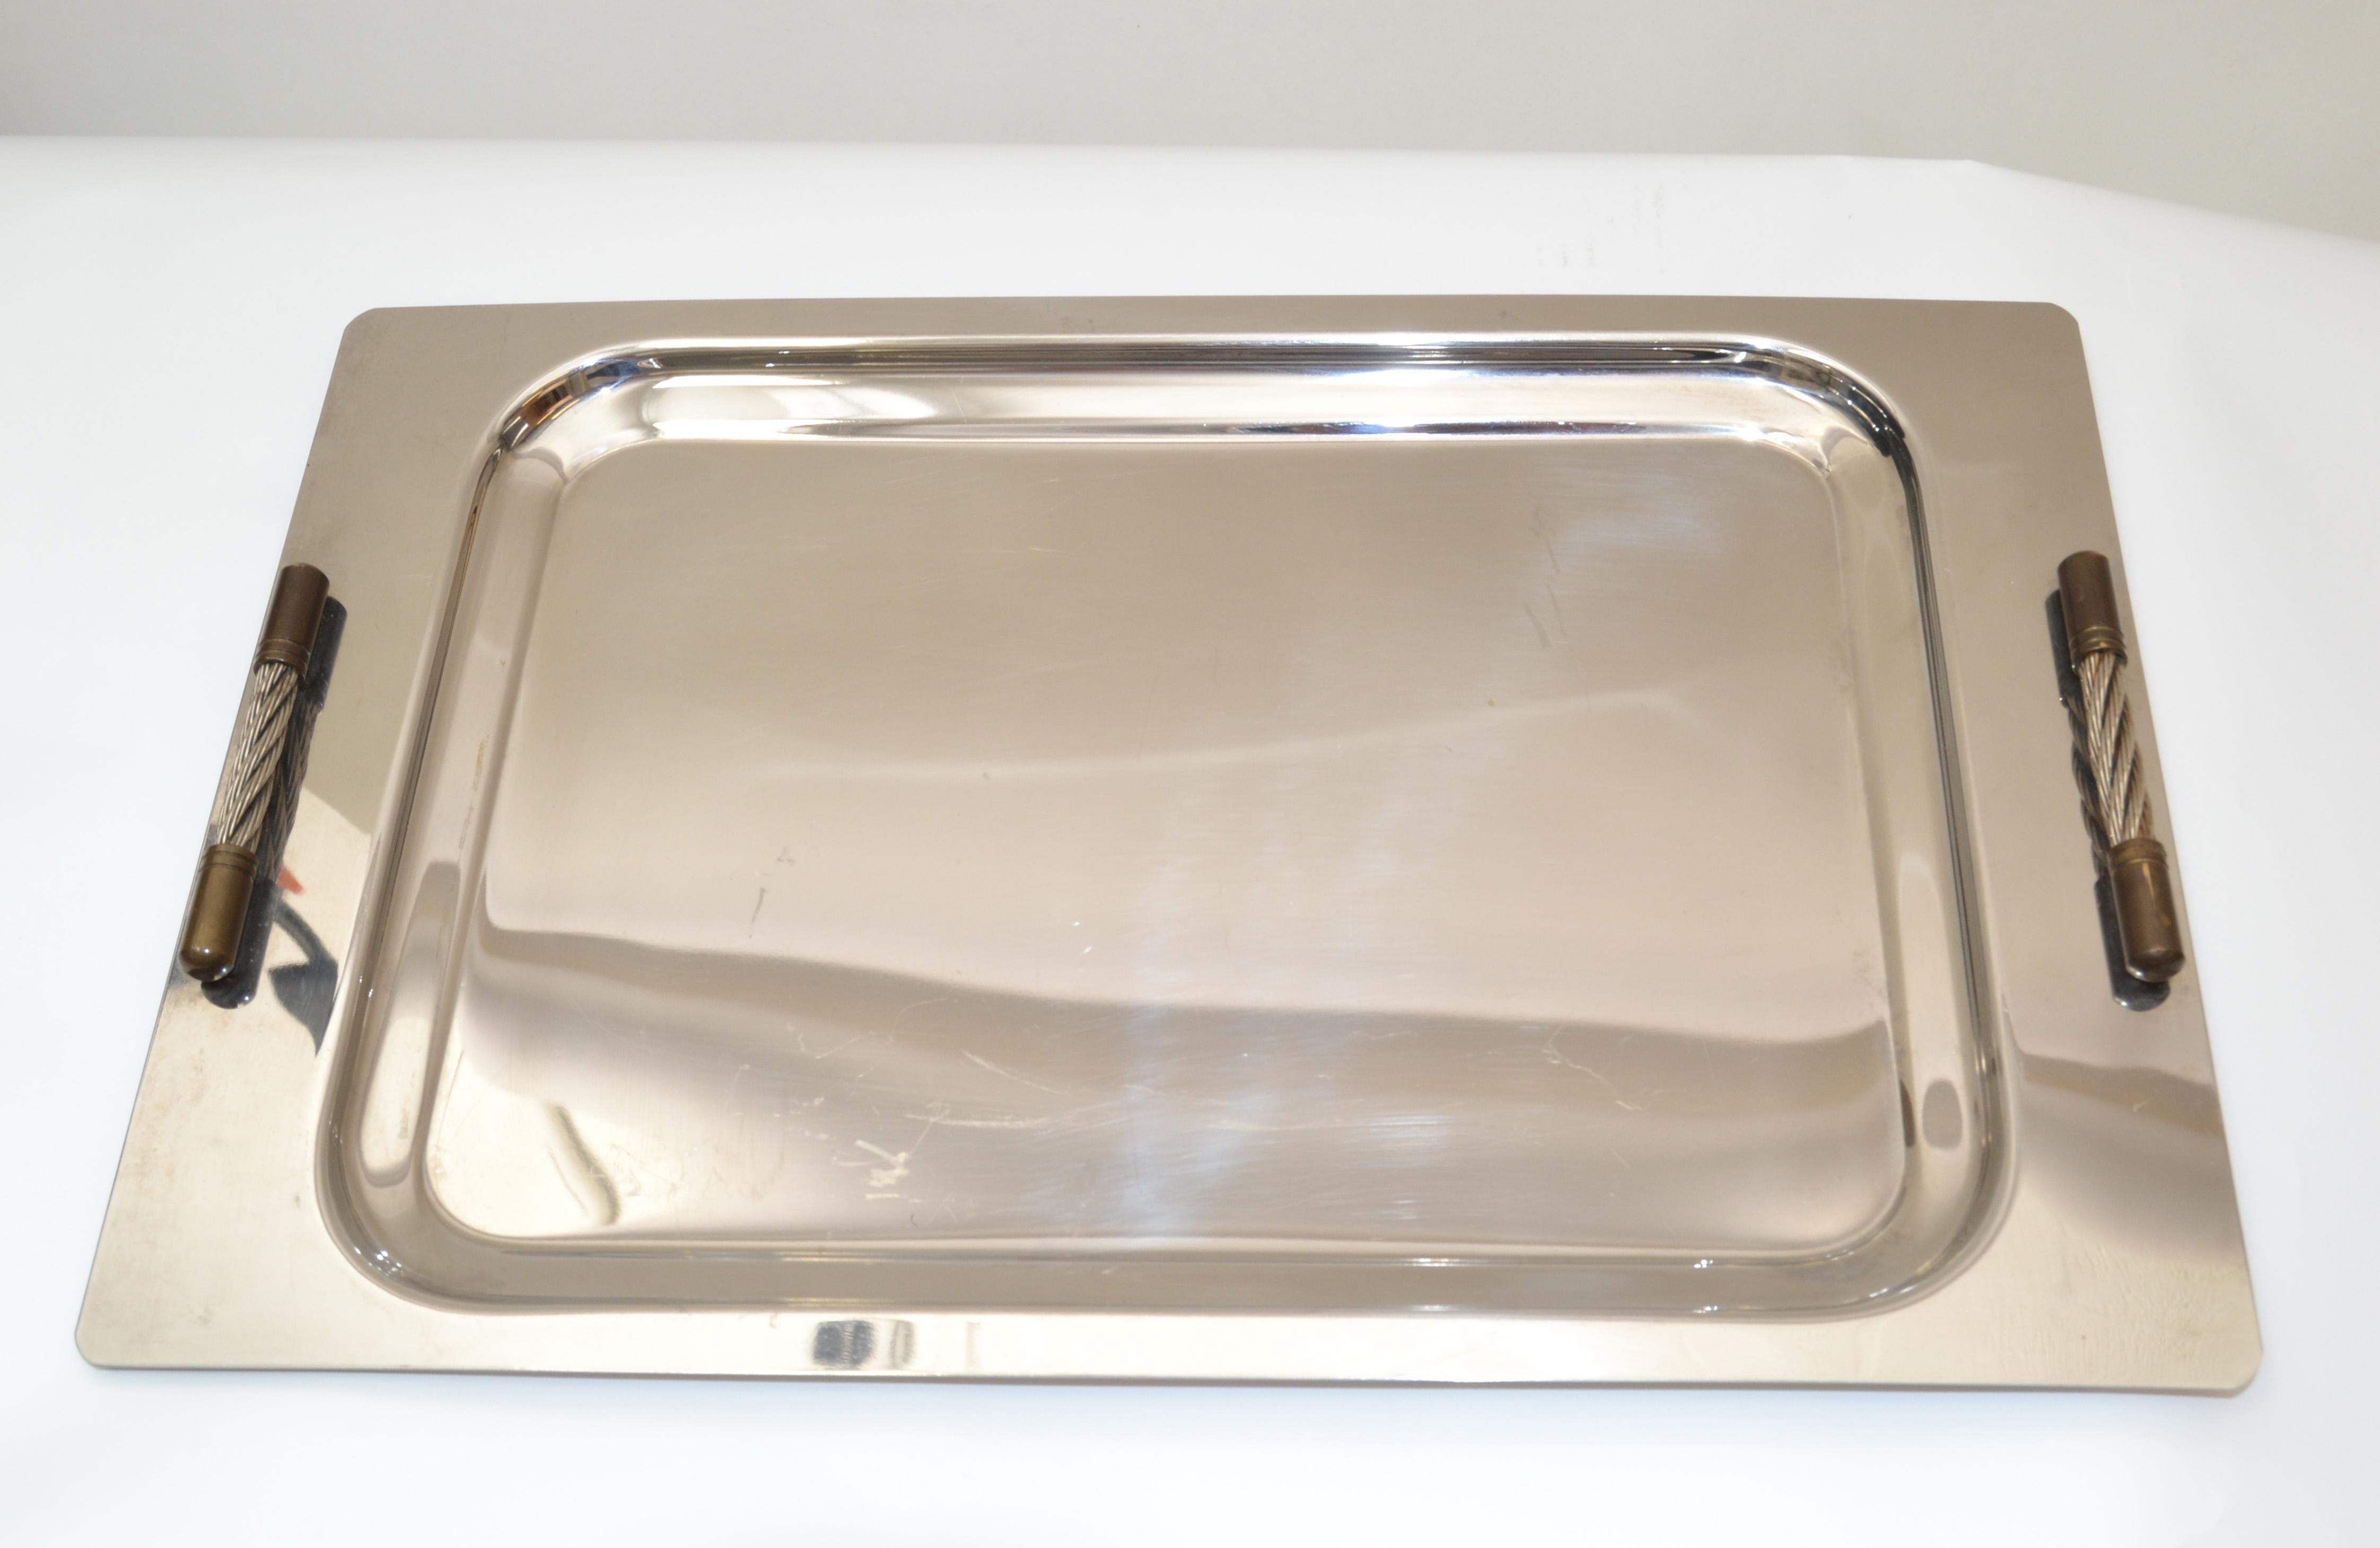 Golden Art Steel Design Argentina Serving Tray Inox 18/8 Stainless Steel, 1980 In Good Condition For Sale In Miami, FL